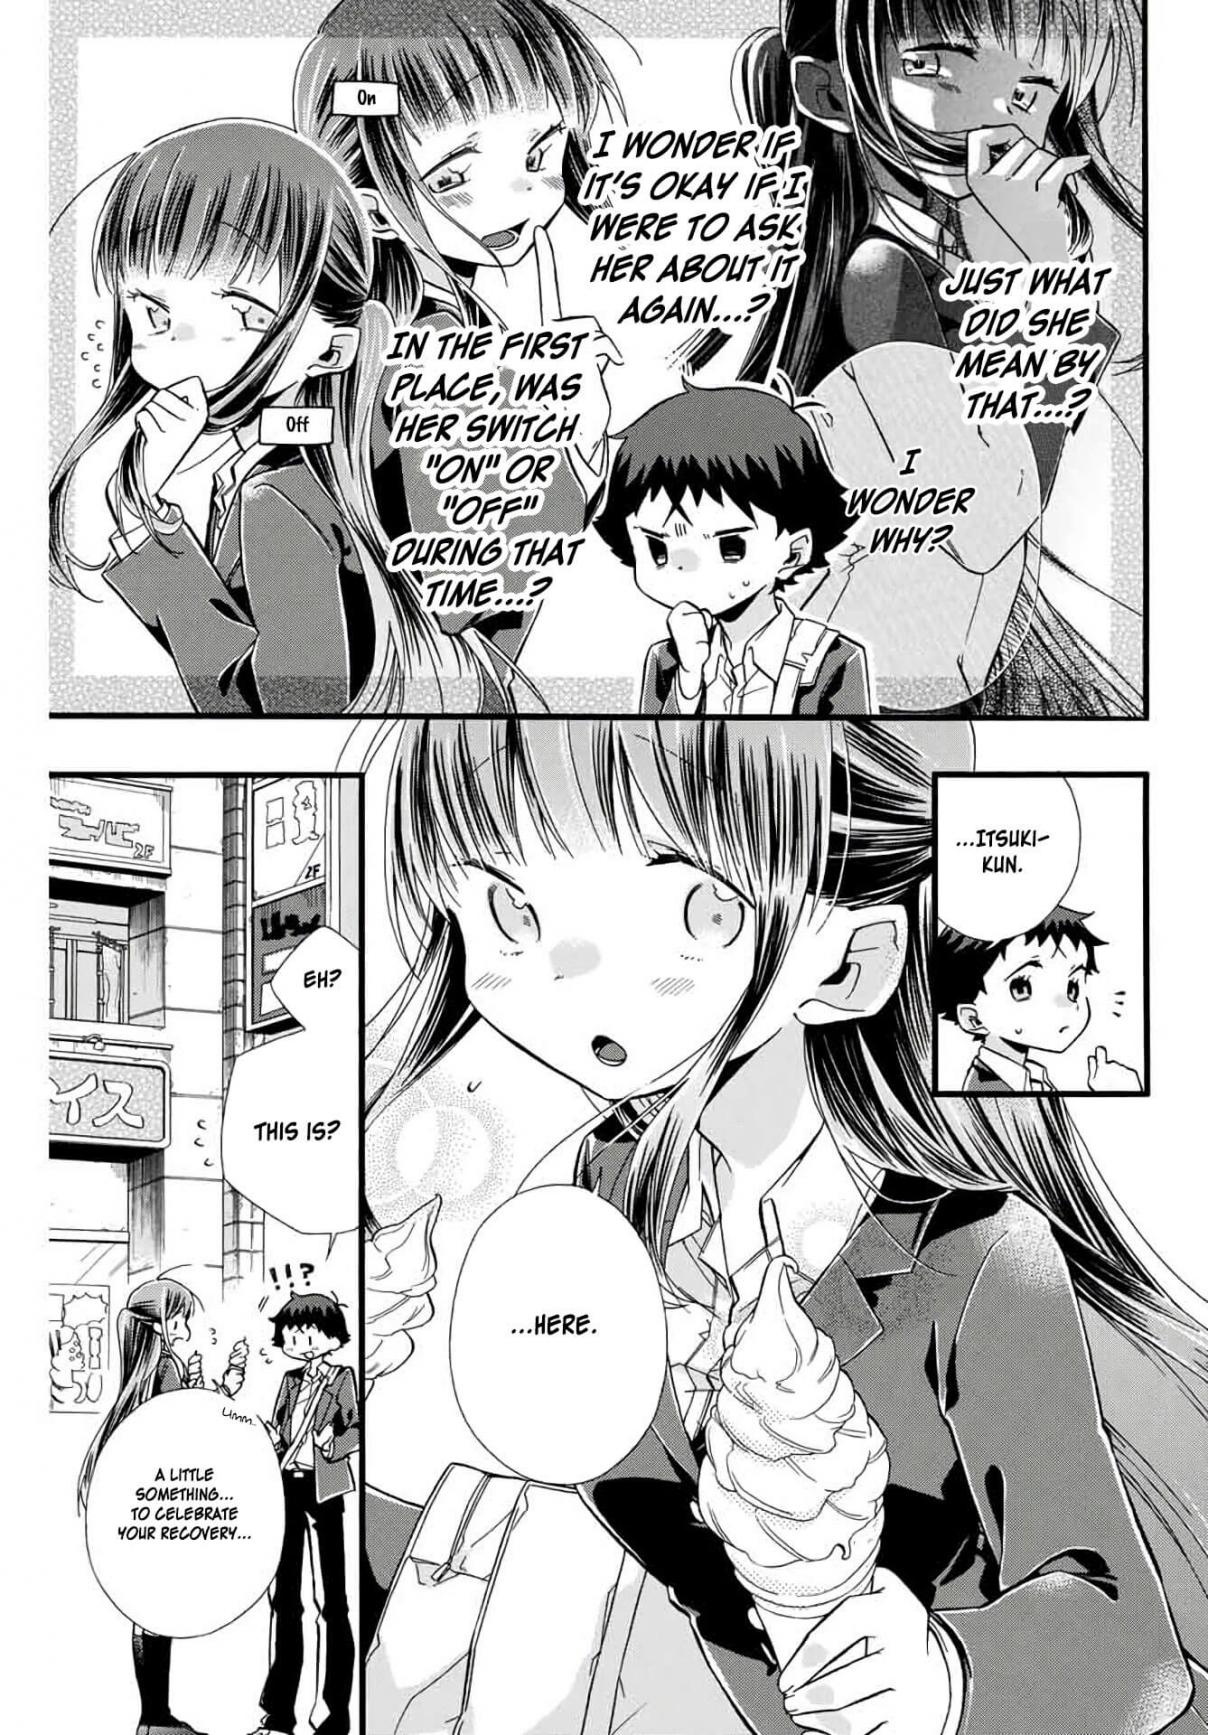 Asanami san to Shinde mo Ikitai. Vol. 1 Ch. 4 An Afterschool Date and Death by Getting Run Over